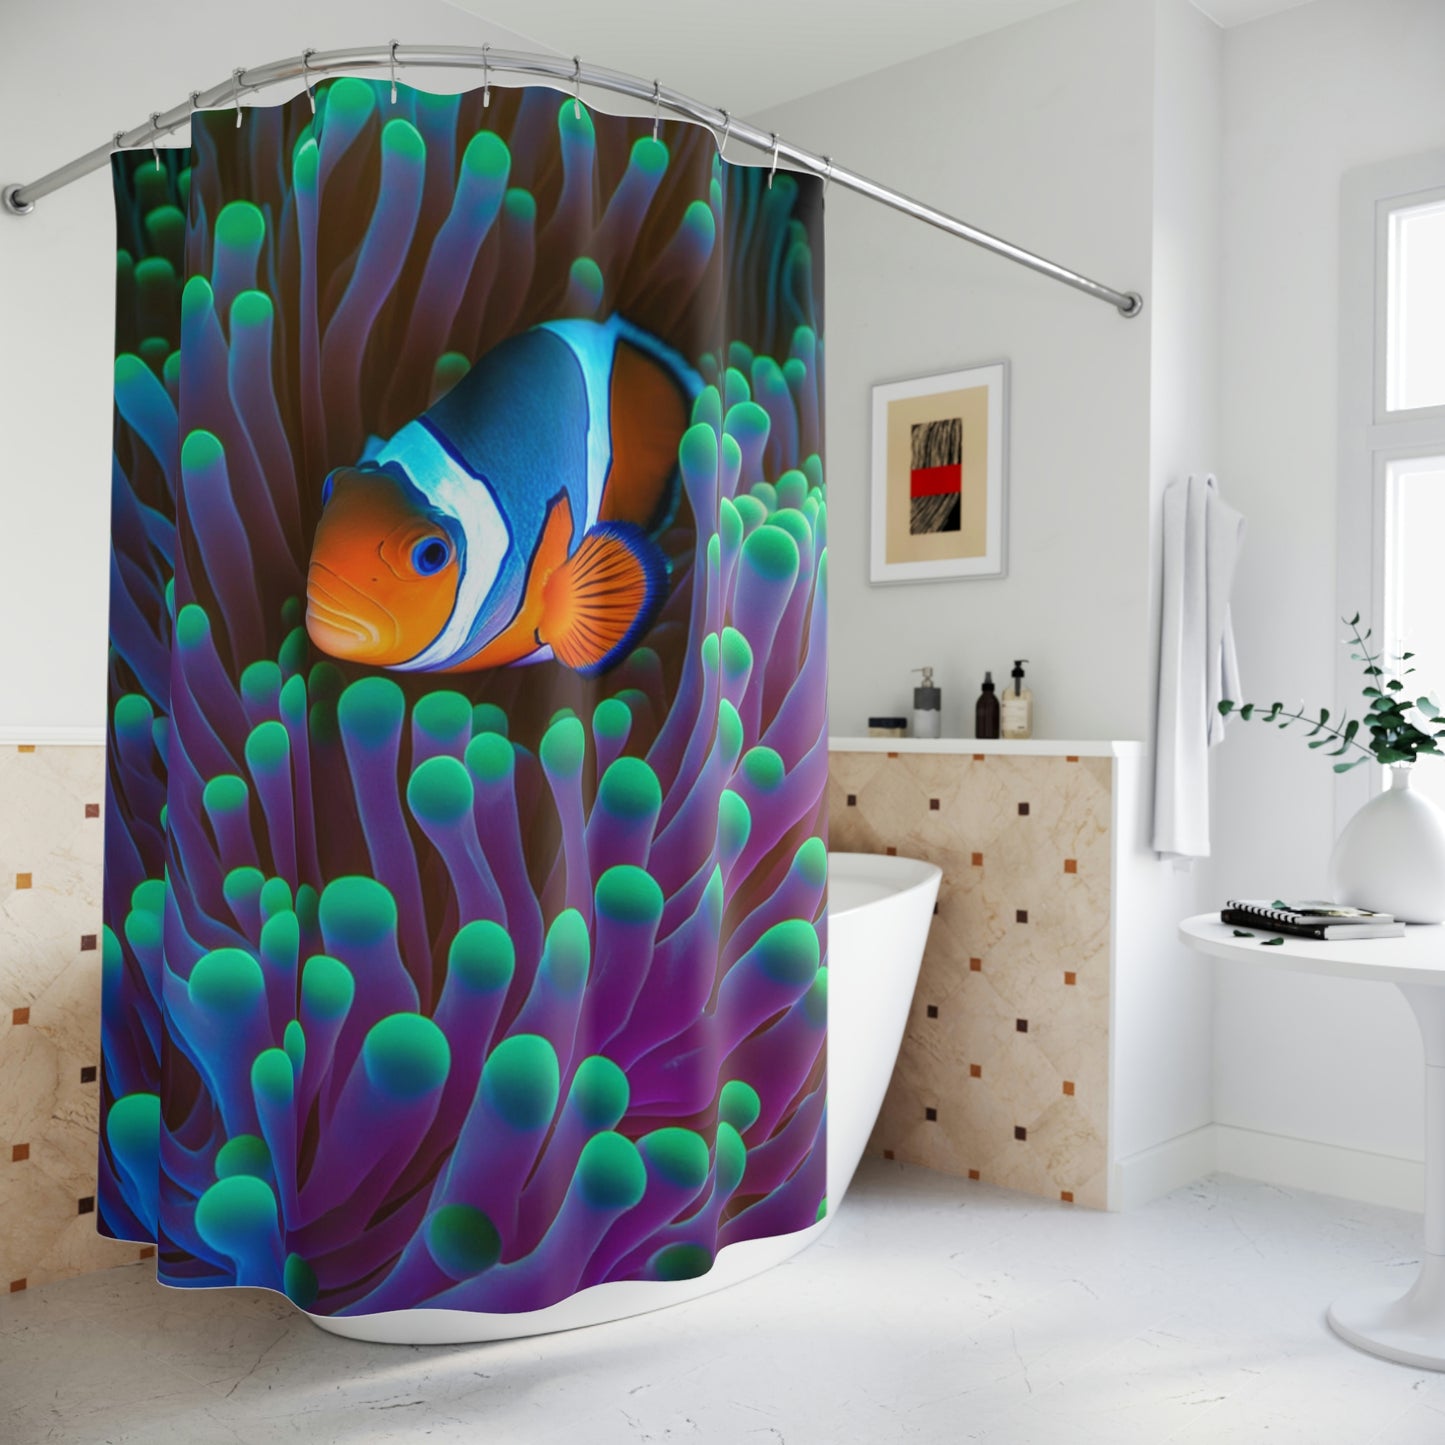 Polyester Shower Curtain clown fish anemone 1